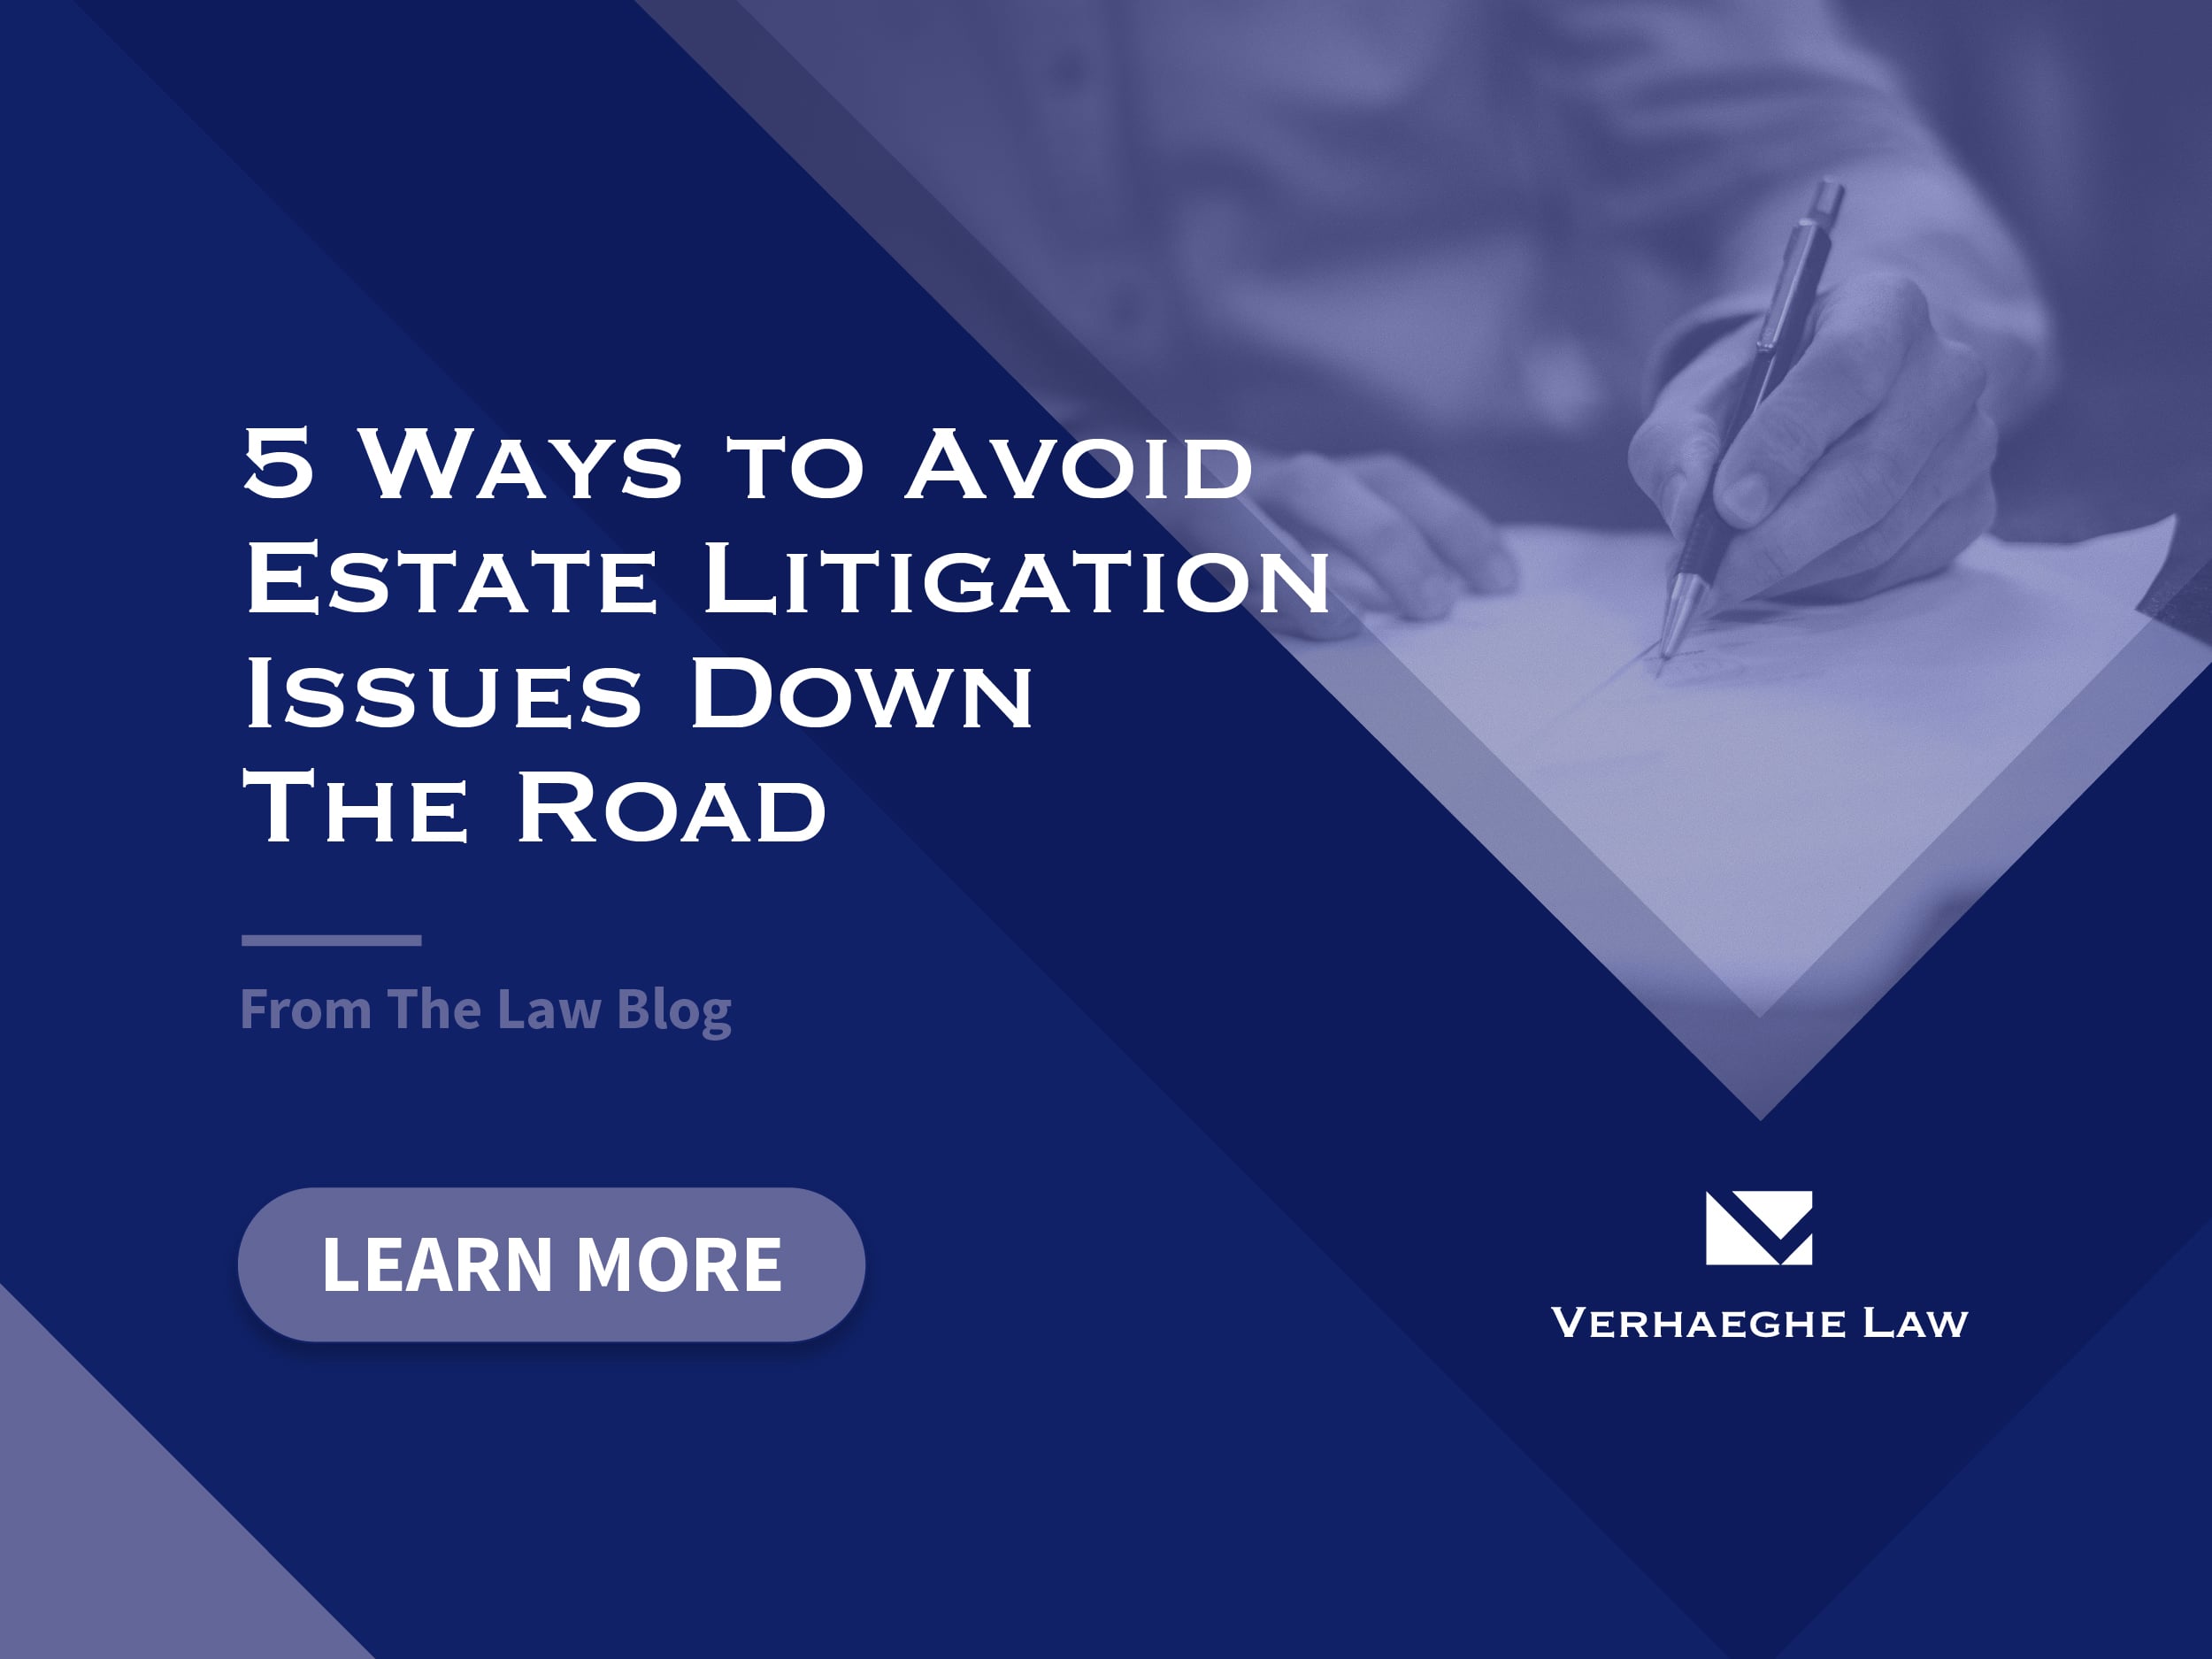 5 Ways To Avoid Estate Litigation Down the Road